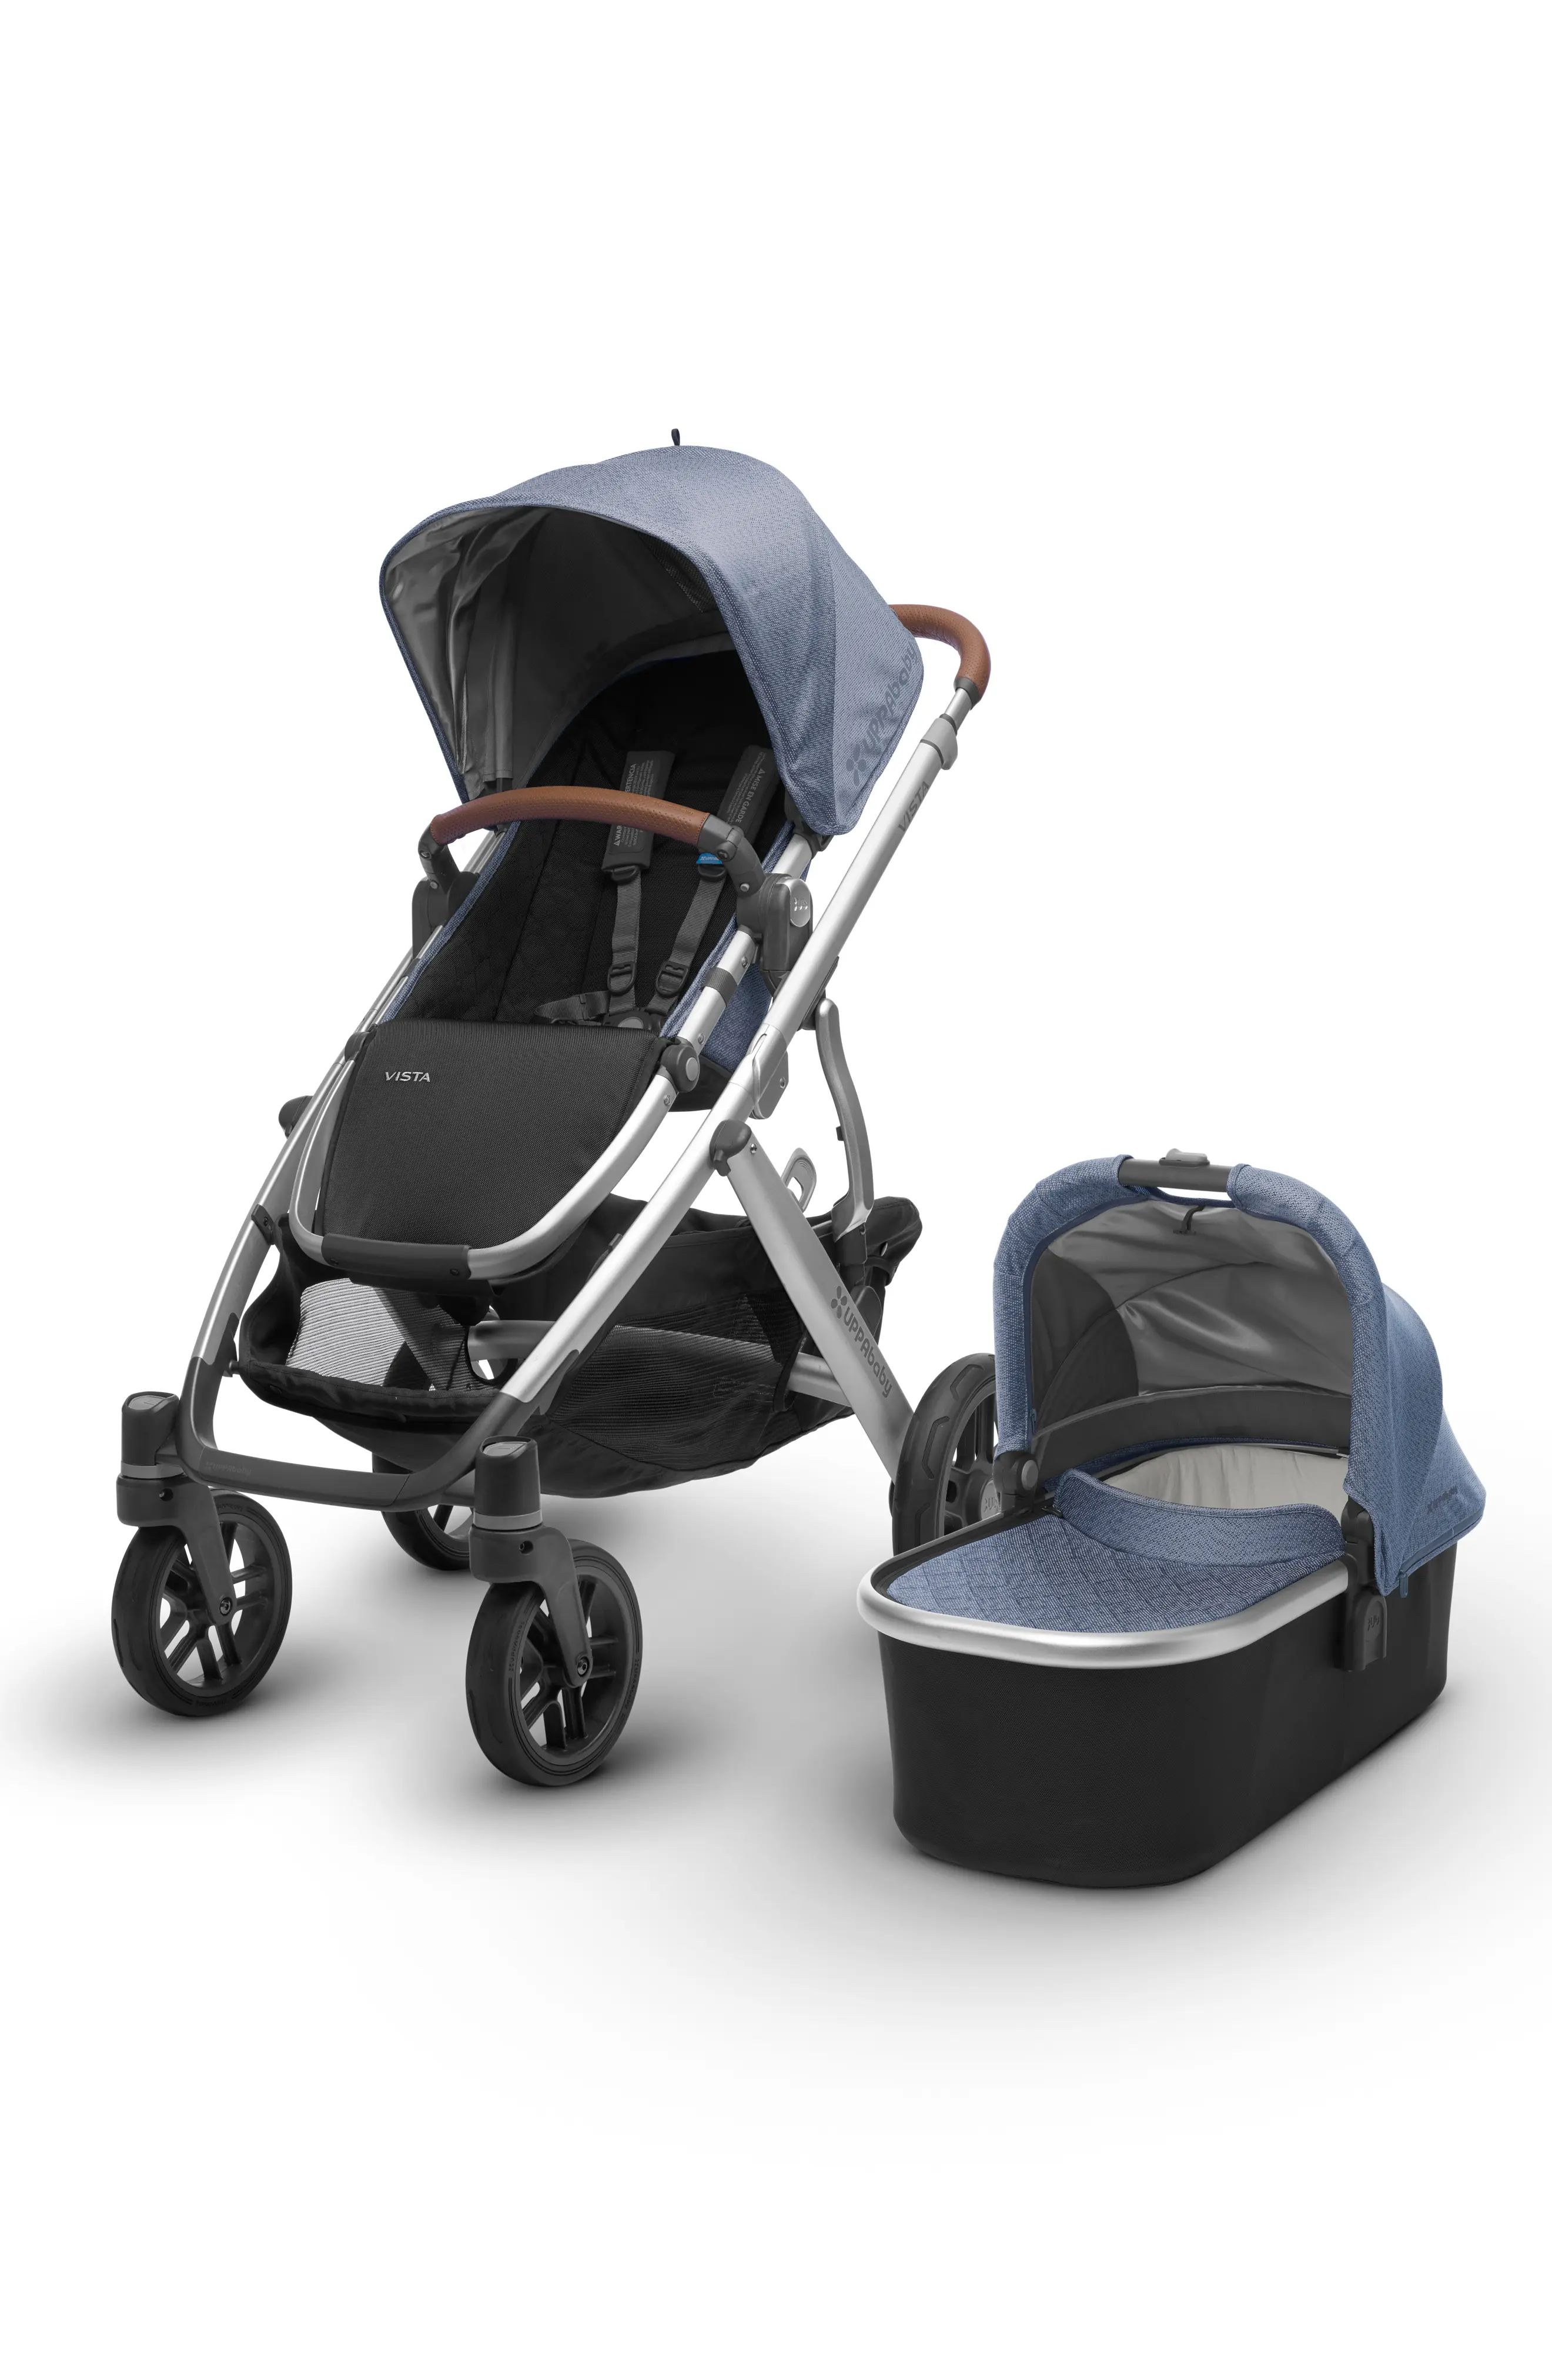 2018 VISTA Aluminum Frame Convertible Complete Stroller with Leather Trim | Nordstrom